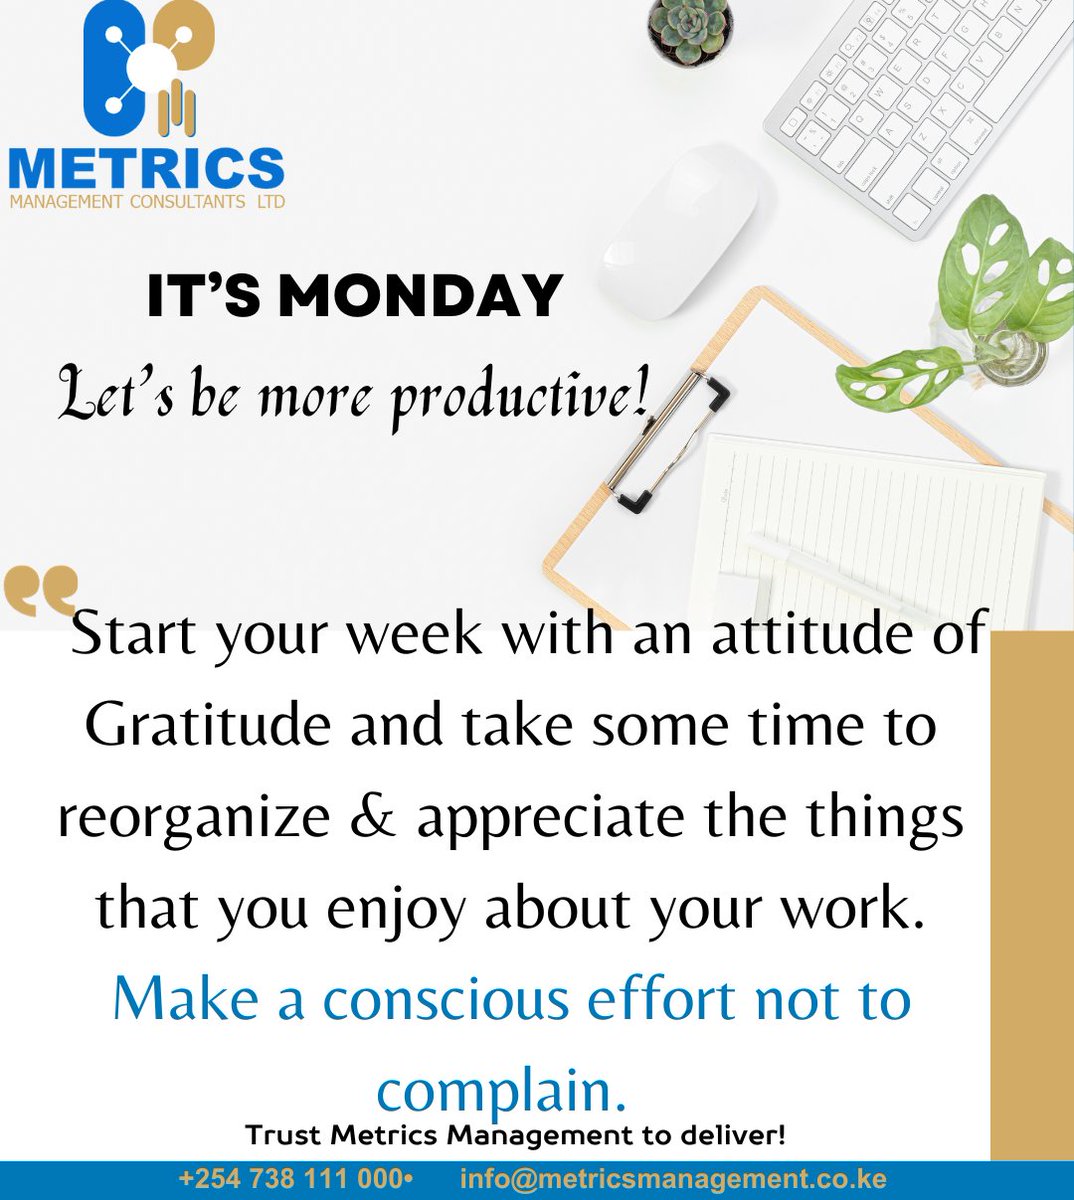 Let's be more productive this new week. Make a conscious effort not to complain.
#Motivationalmonday #gratitudeattitude #Nocomplaints #moreproductive
#Trustmetricsmanagementtodeliver
For all your HR services,
Call us at +254738 111 000
Email us at info@metricsmanagement.co.ke